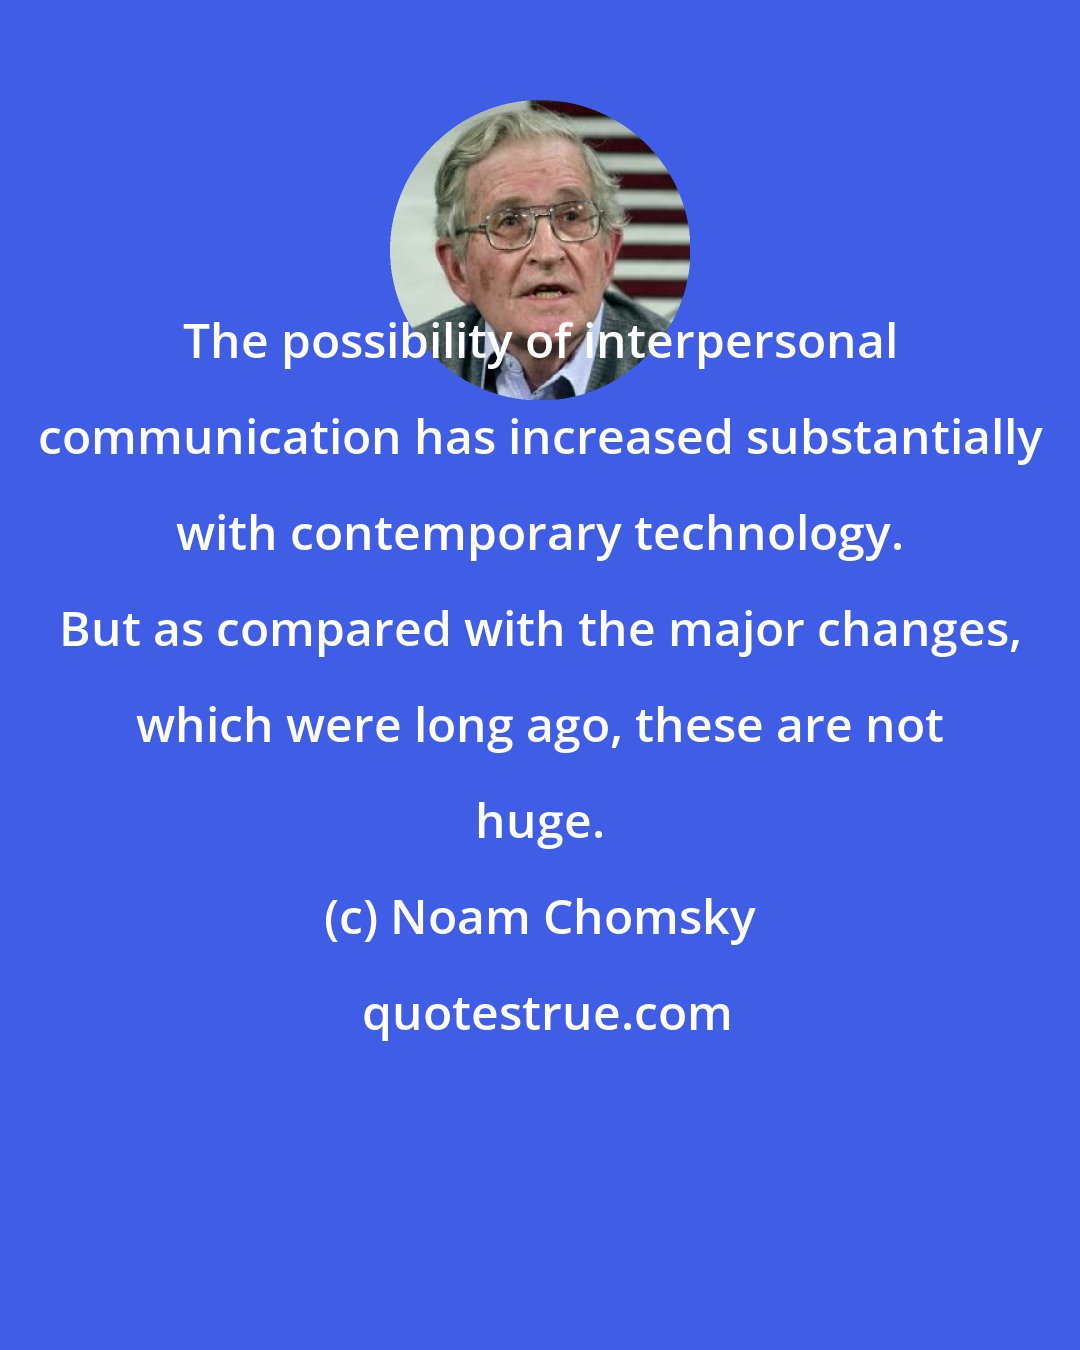 Noam Chomsky: The possibility of interpersonal communication has increased substantially with contemporary technology. But as compared with the major changes, which were long ago, these are not huge.